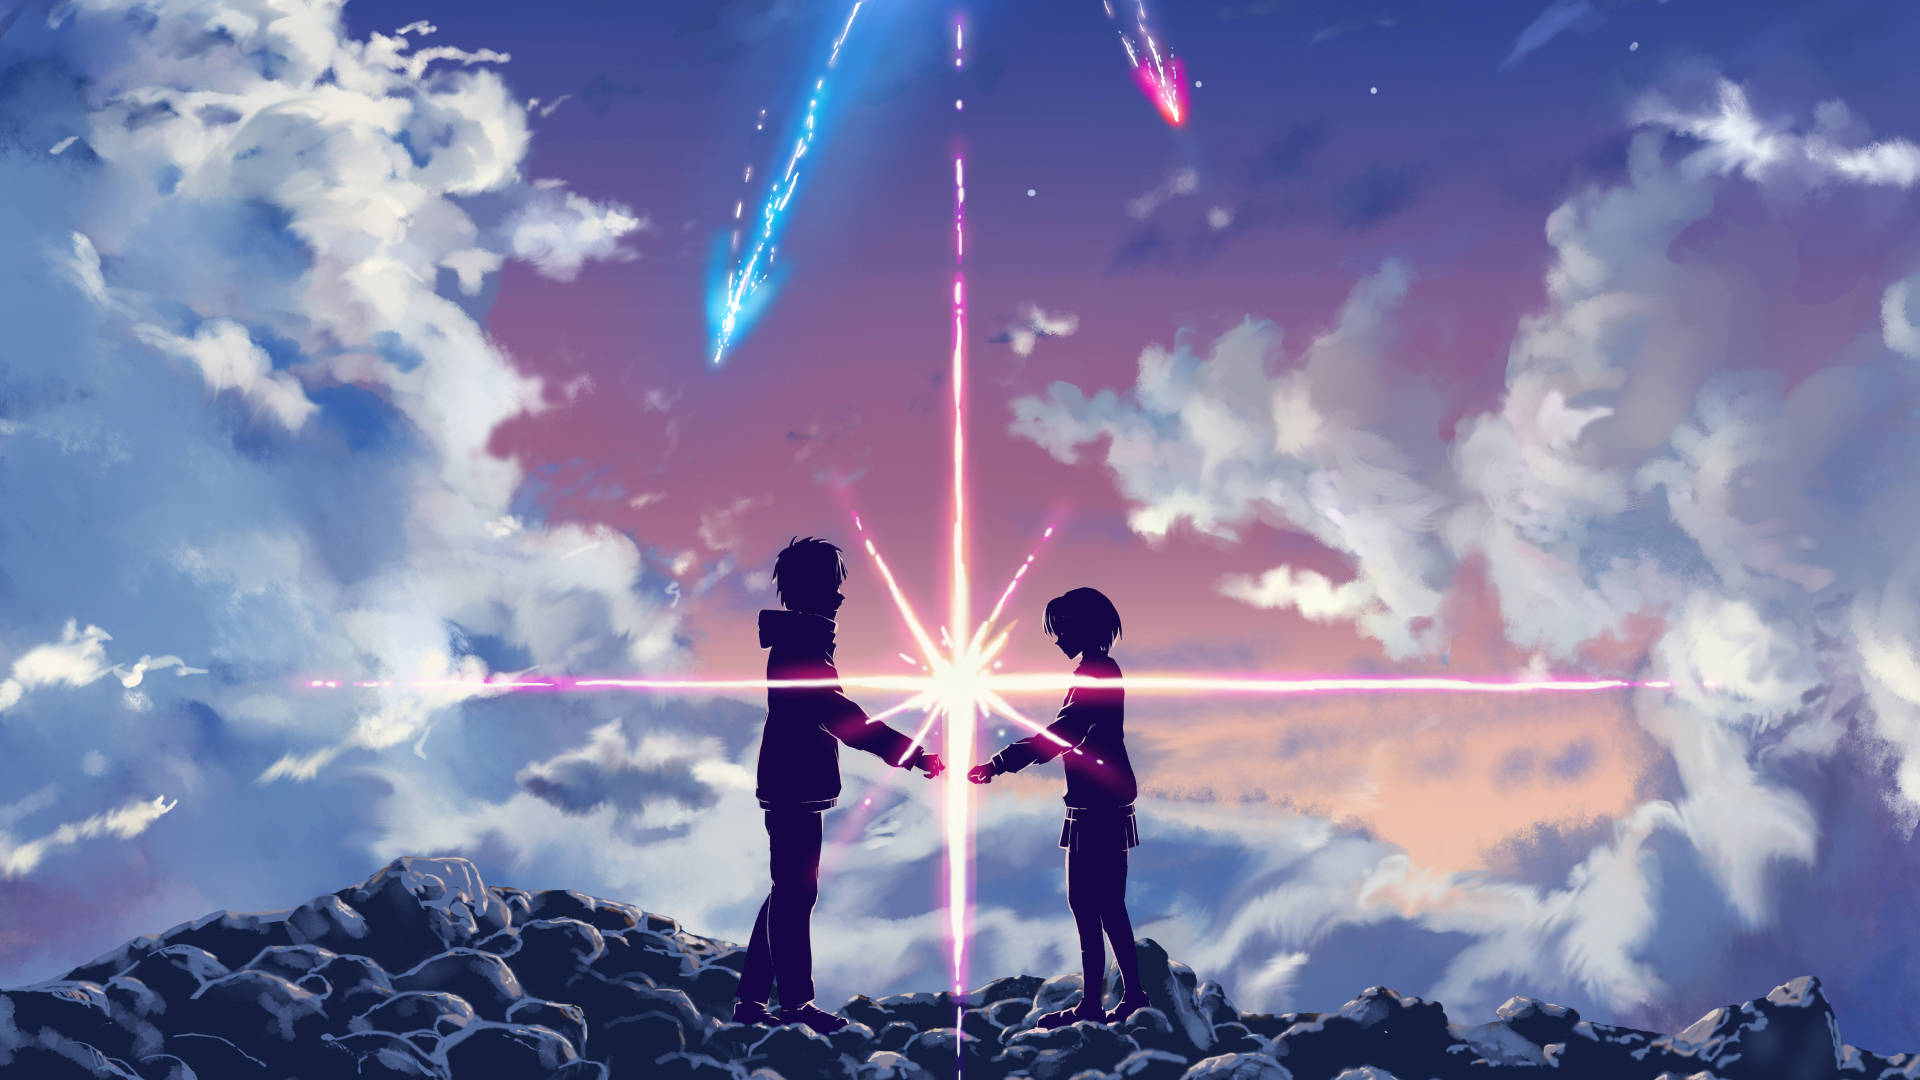 Your Name Anime 2016 Lovers Meeting Comet Background